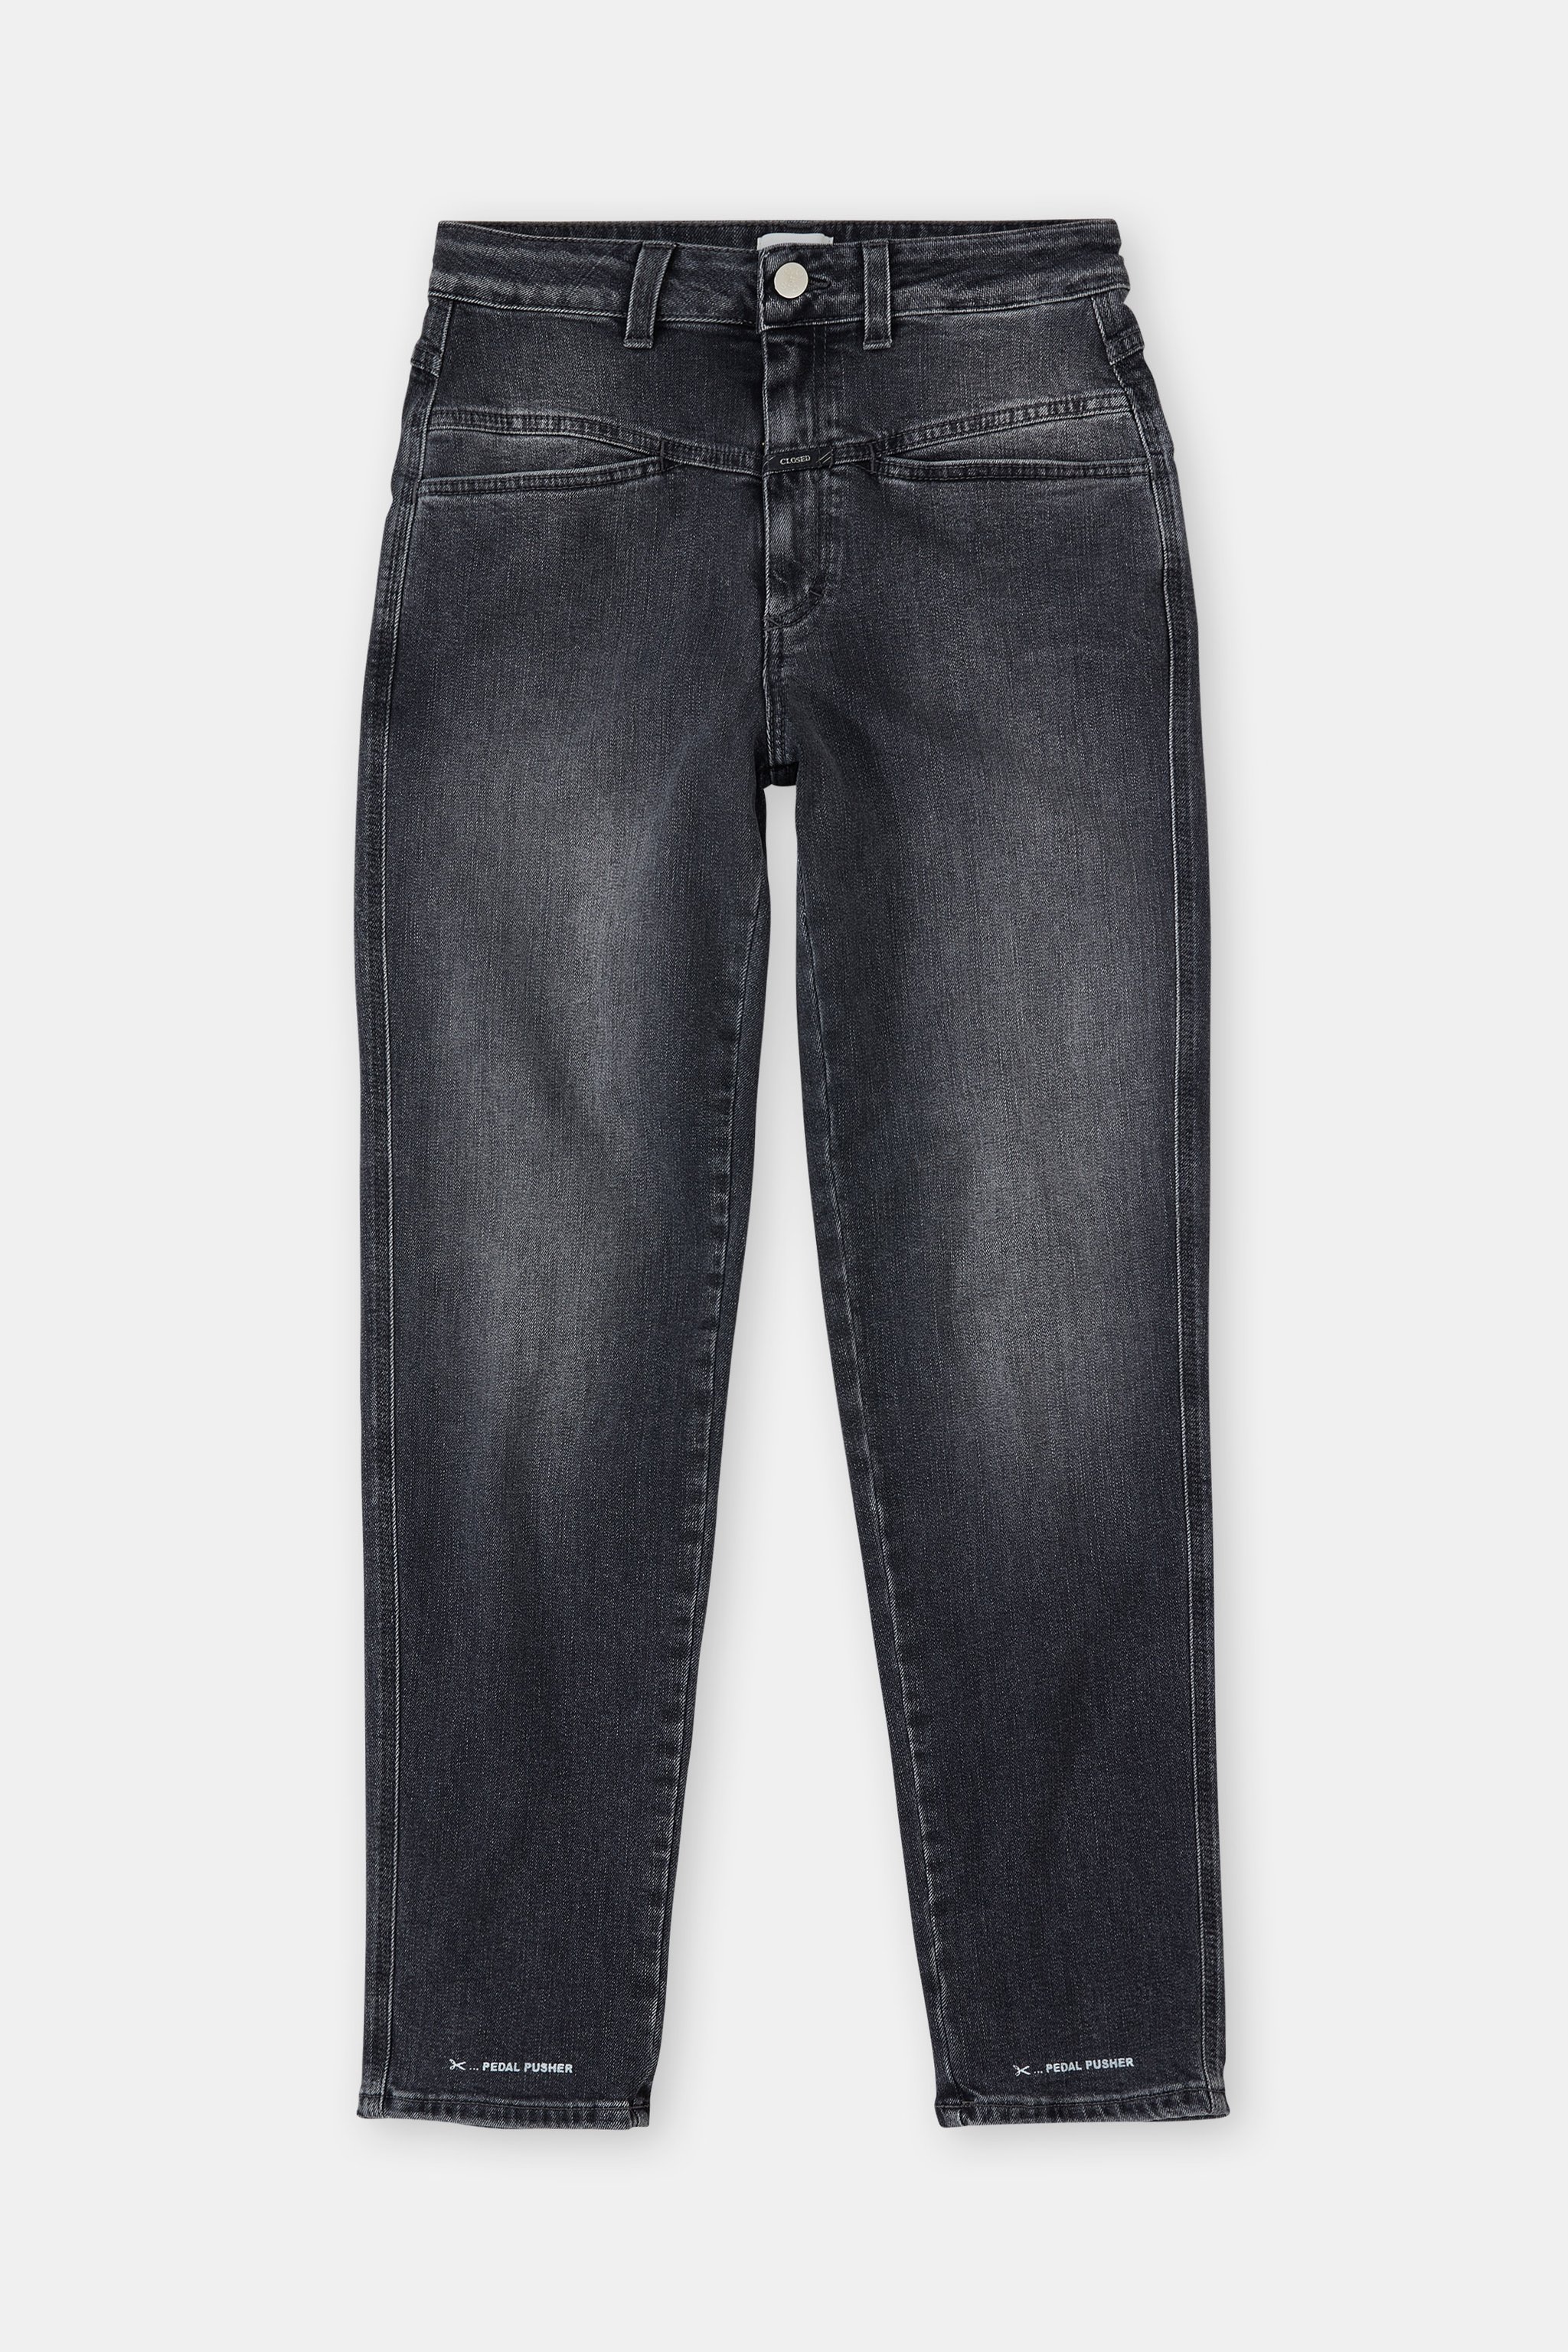 HERITAGE JEANS - STYLE NAME PEDAL PUSHER | CLOSED